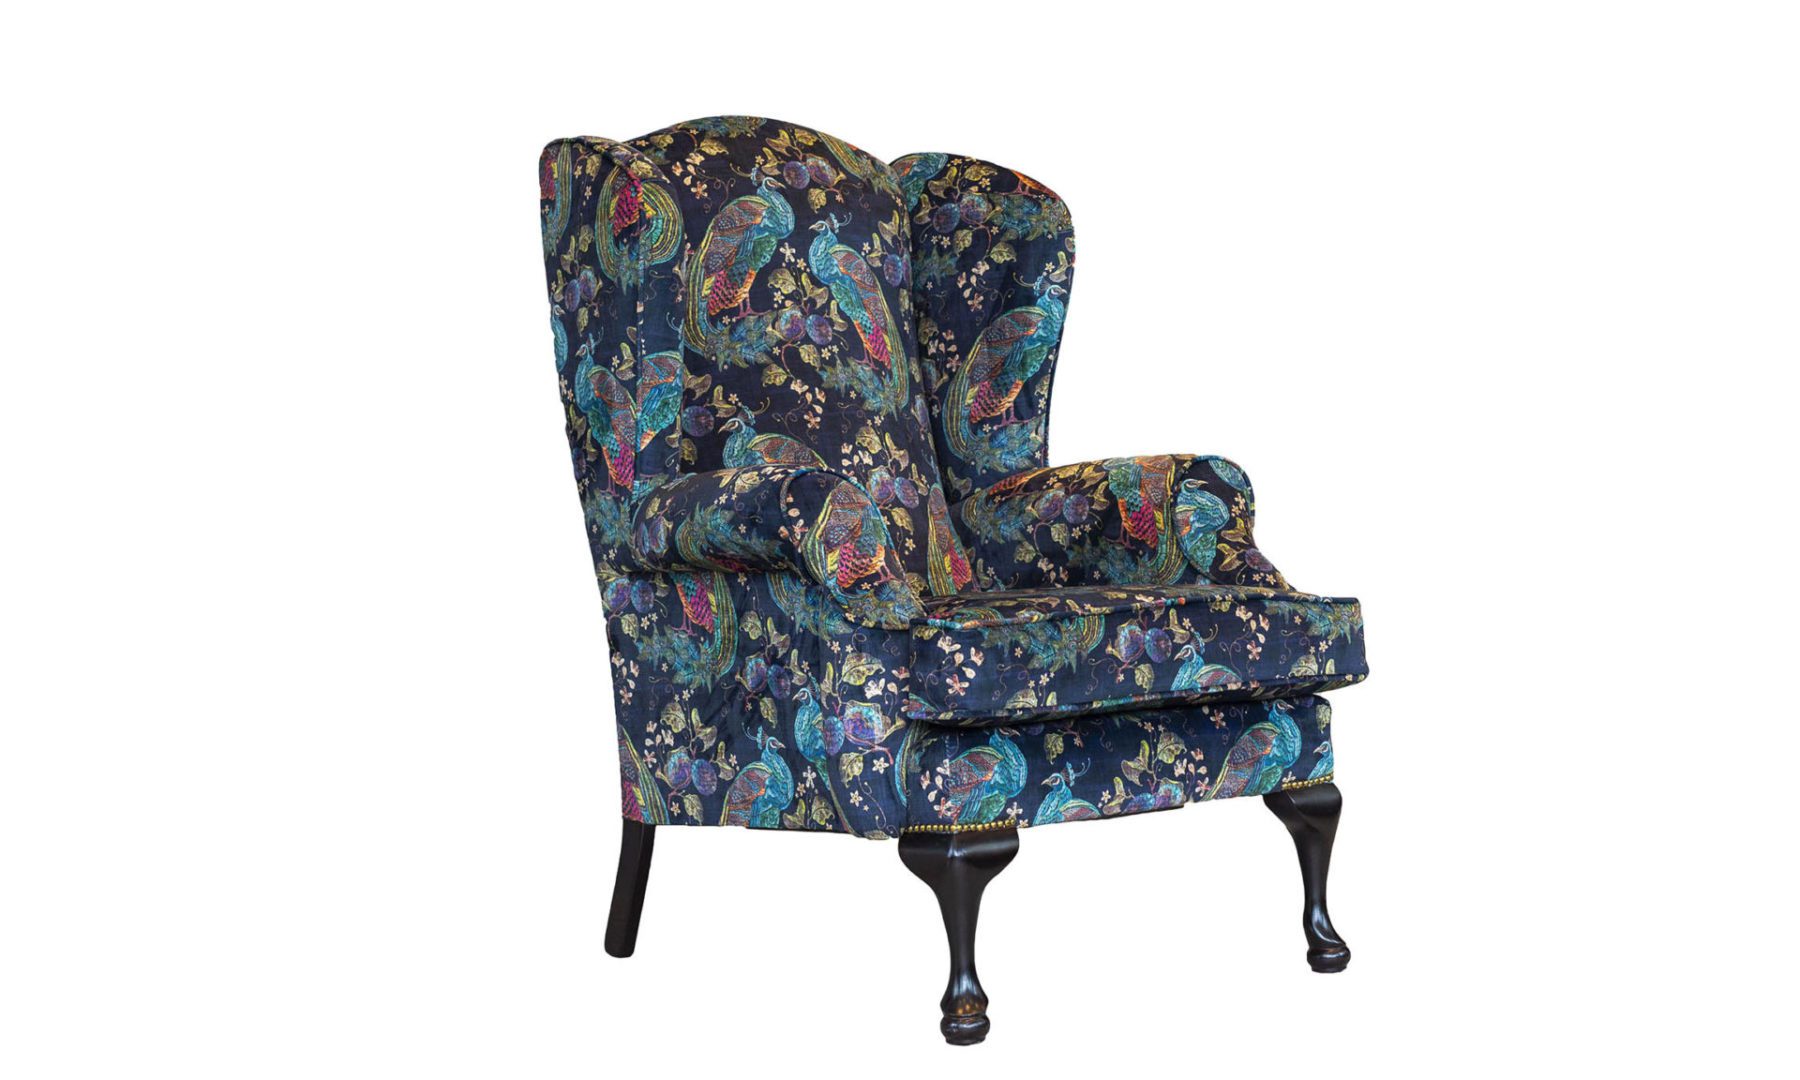 Queen Anne Chair in Peacock Navy, Platinum Collection Fabric